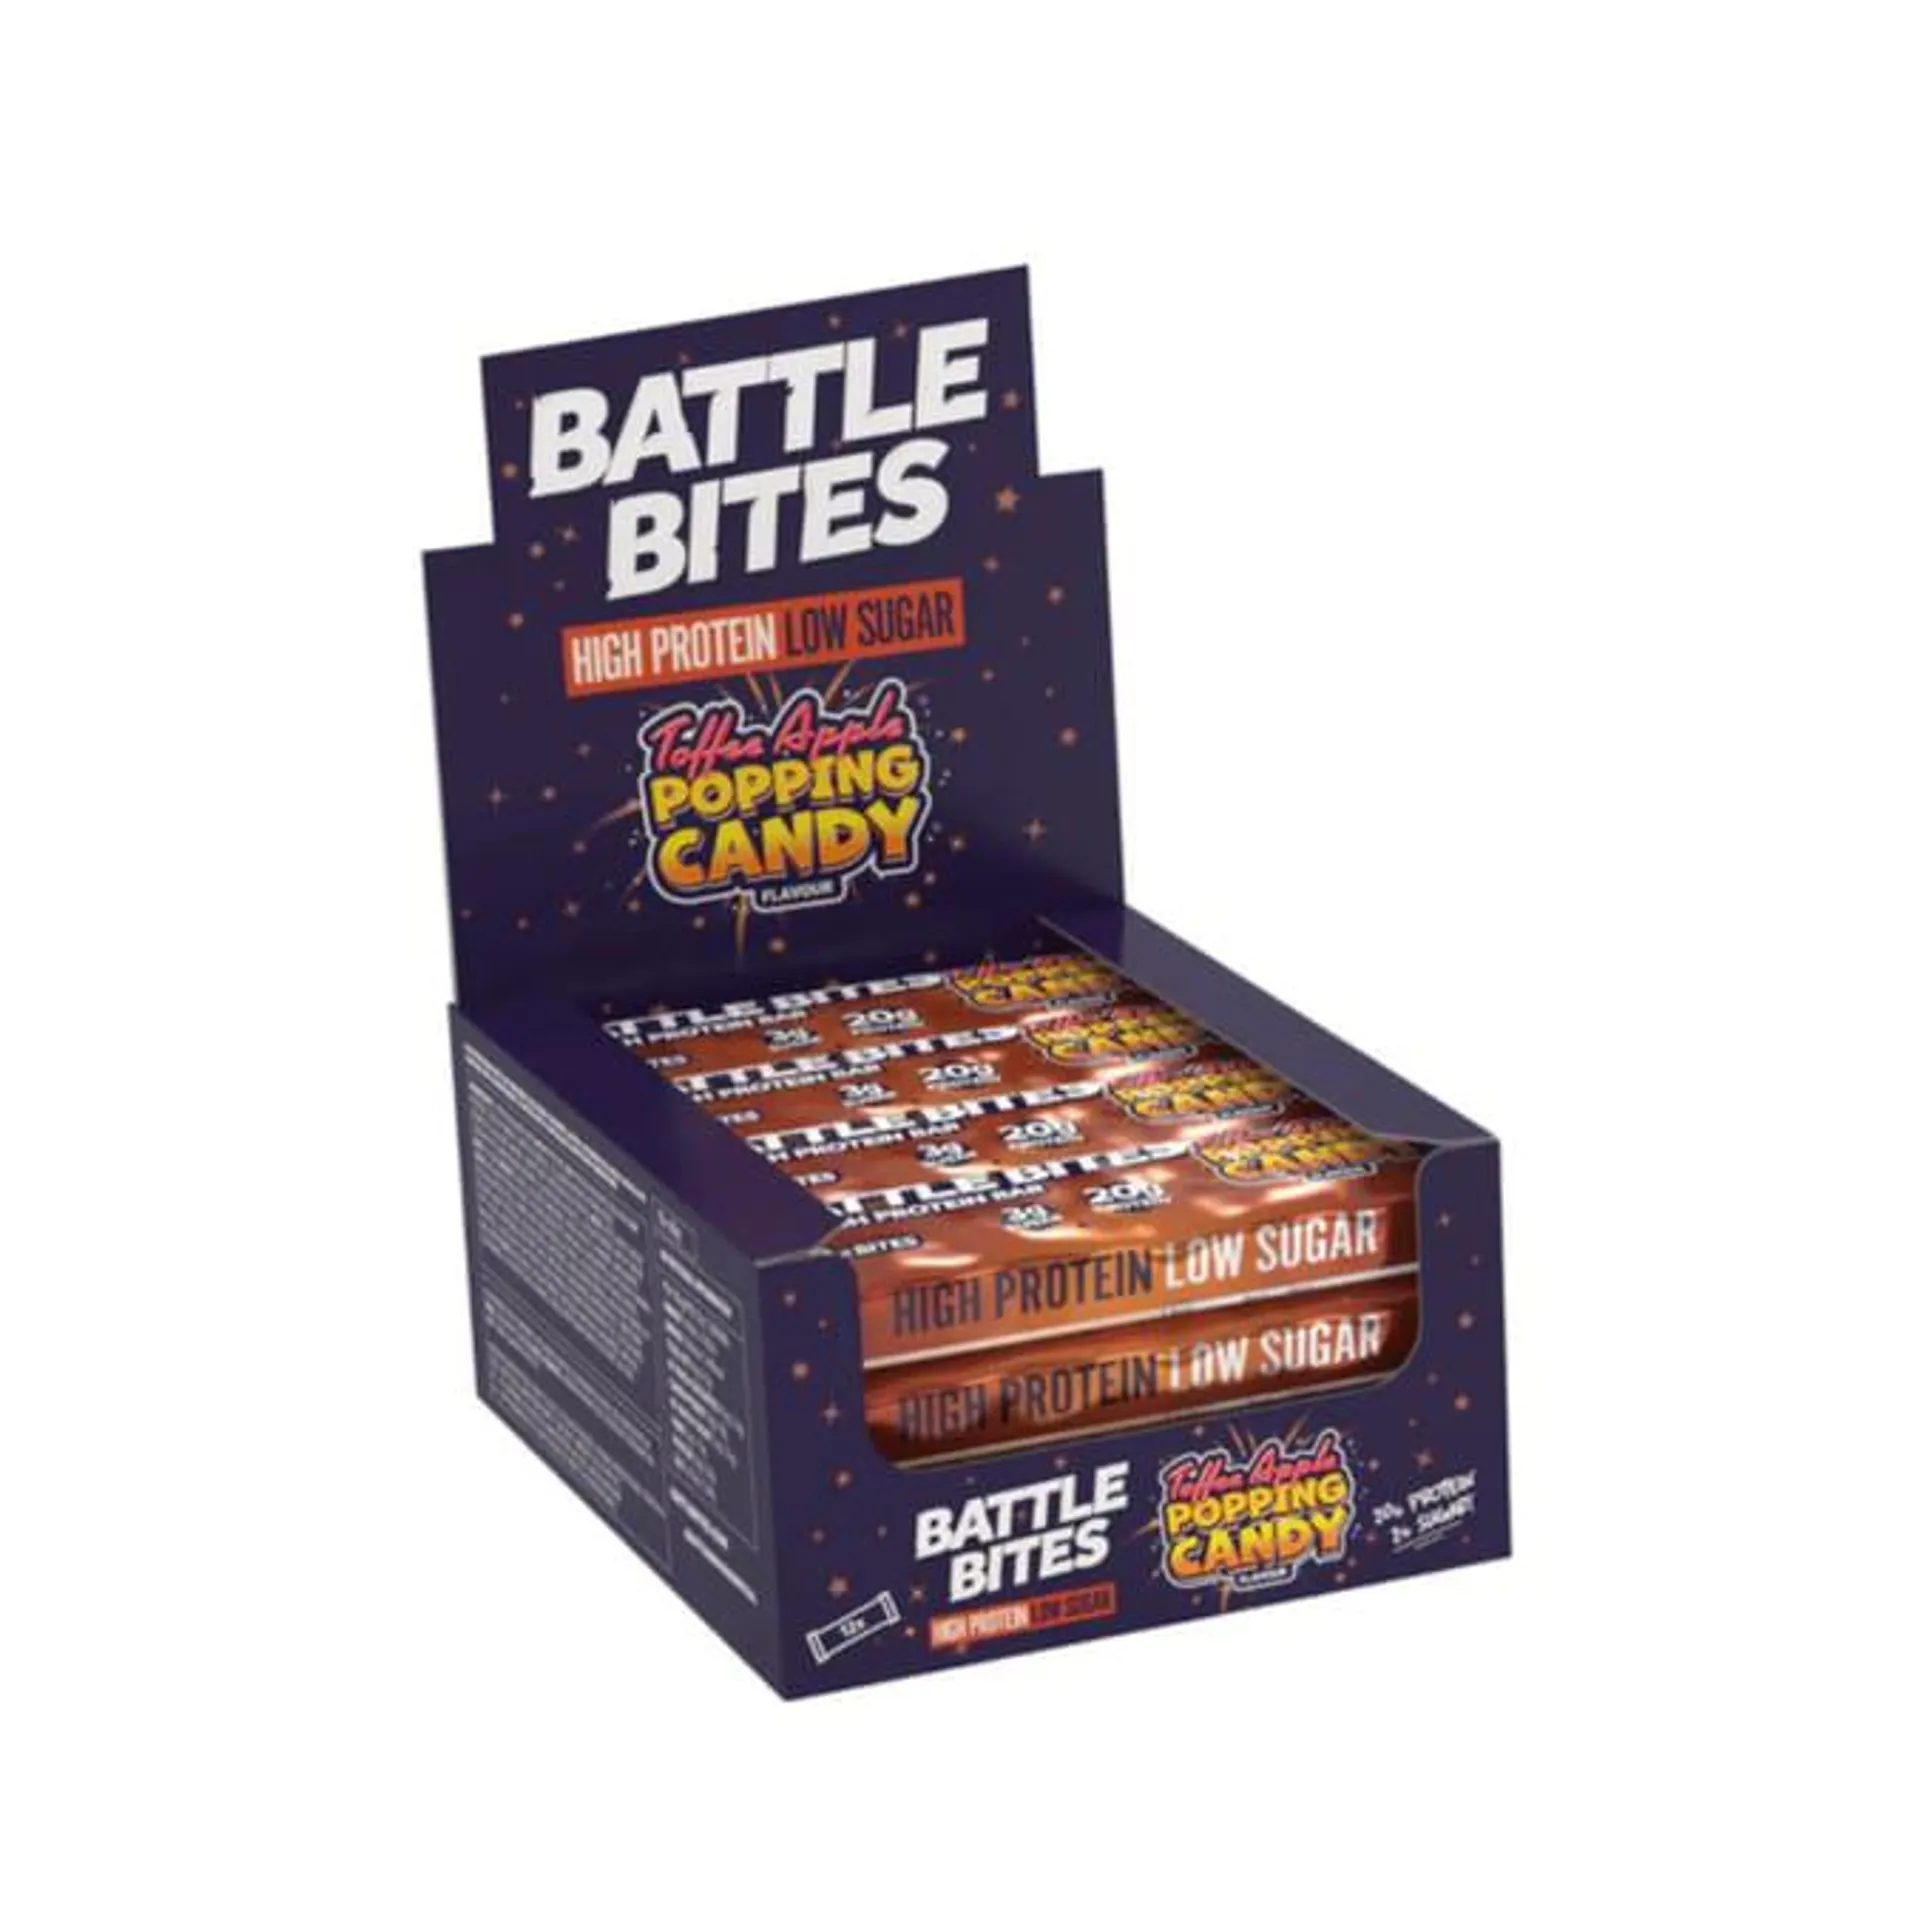 Battle Bites Protein Bar 12 Pack - Toffee Apple Popping Candy